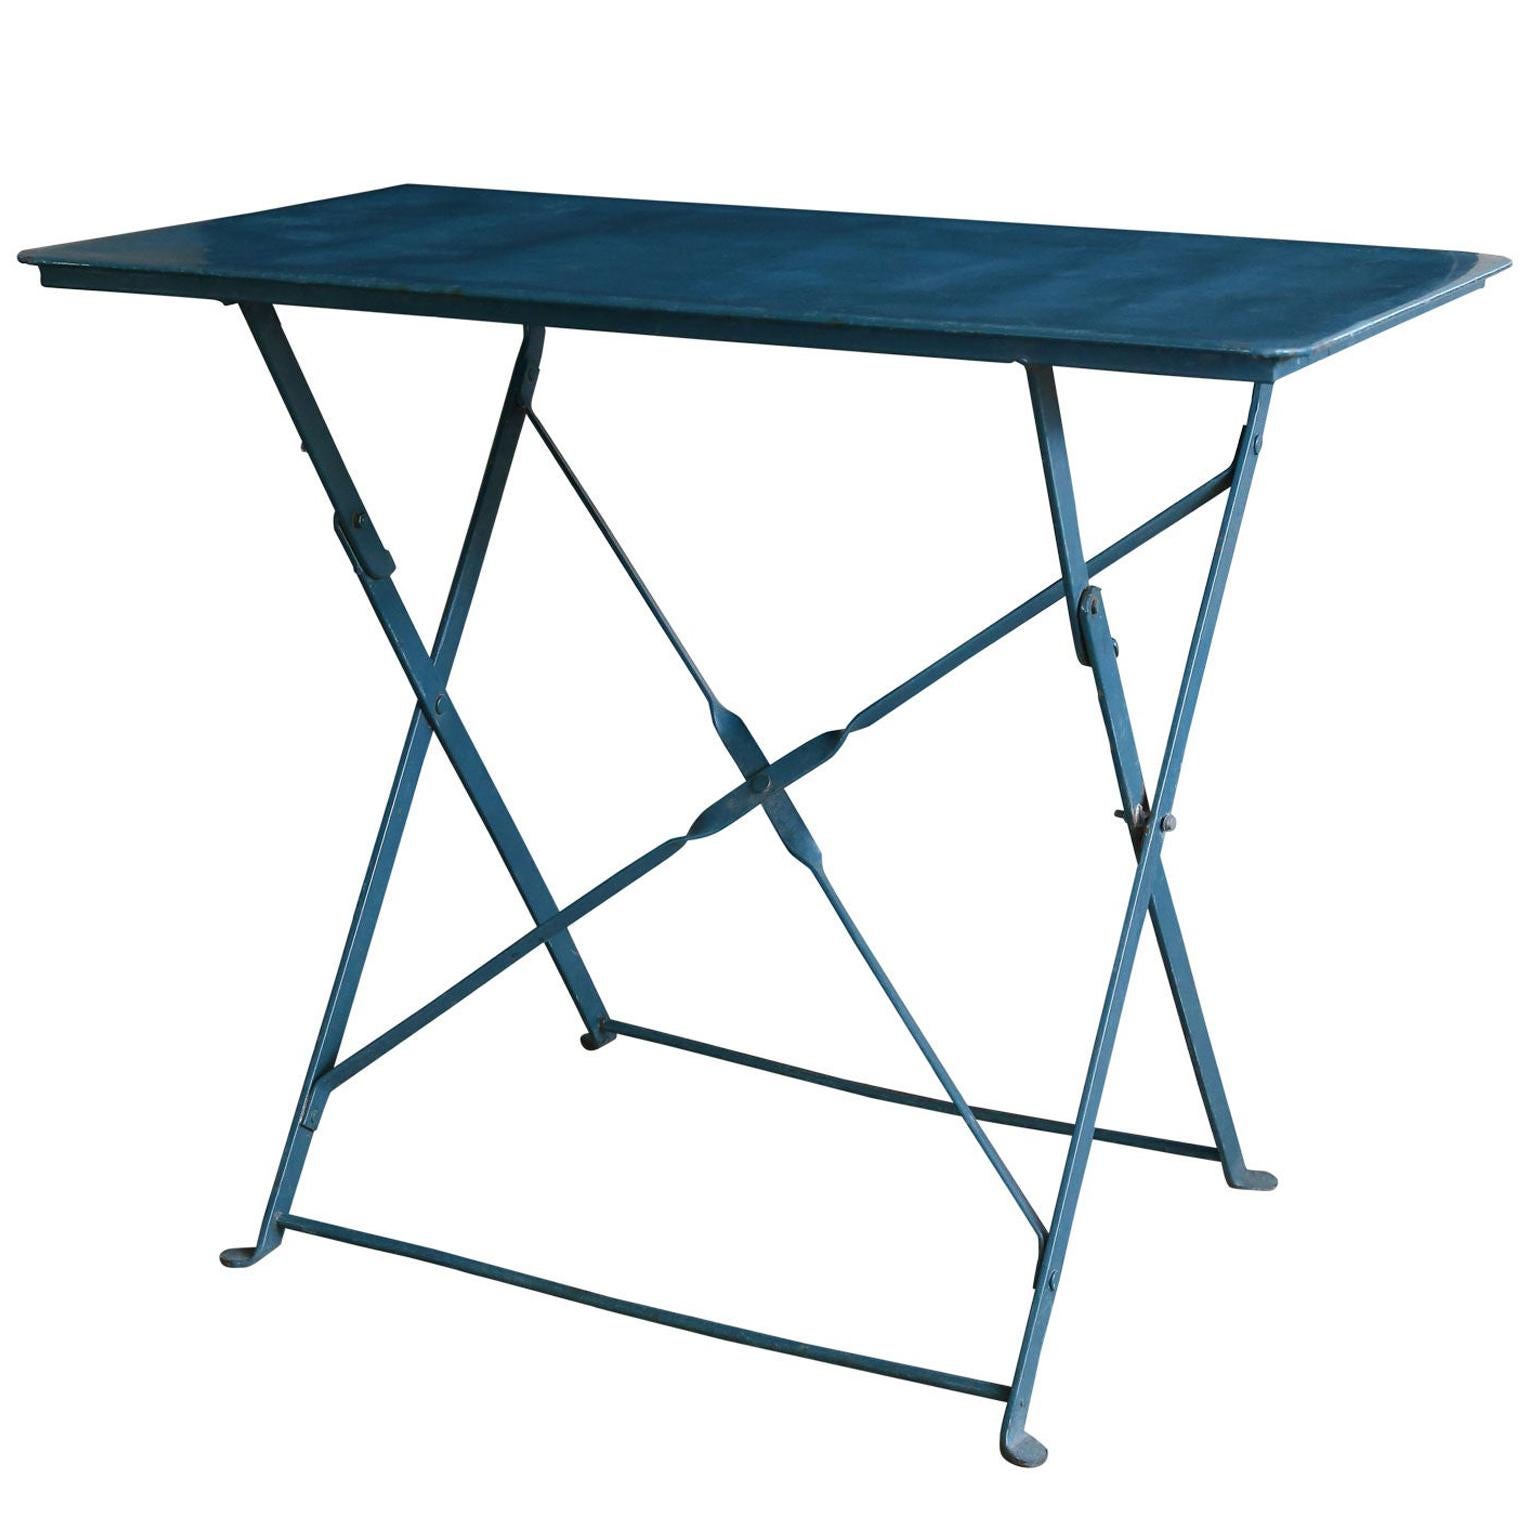 Folding French Rectangular Side Table from a Bistrot